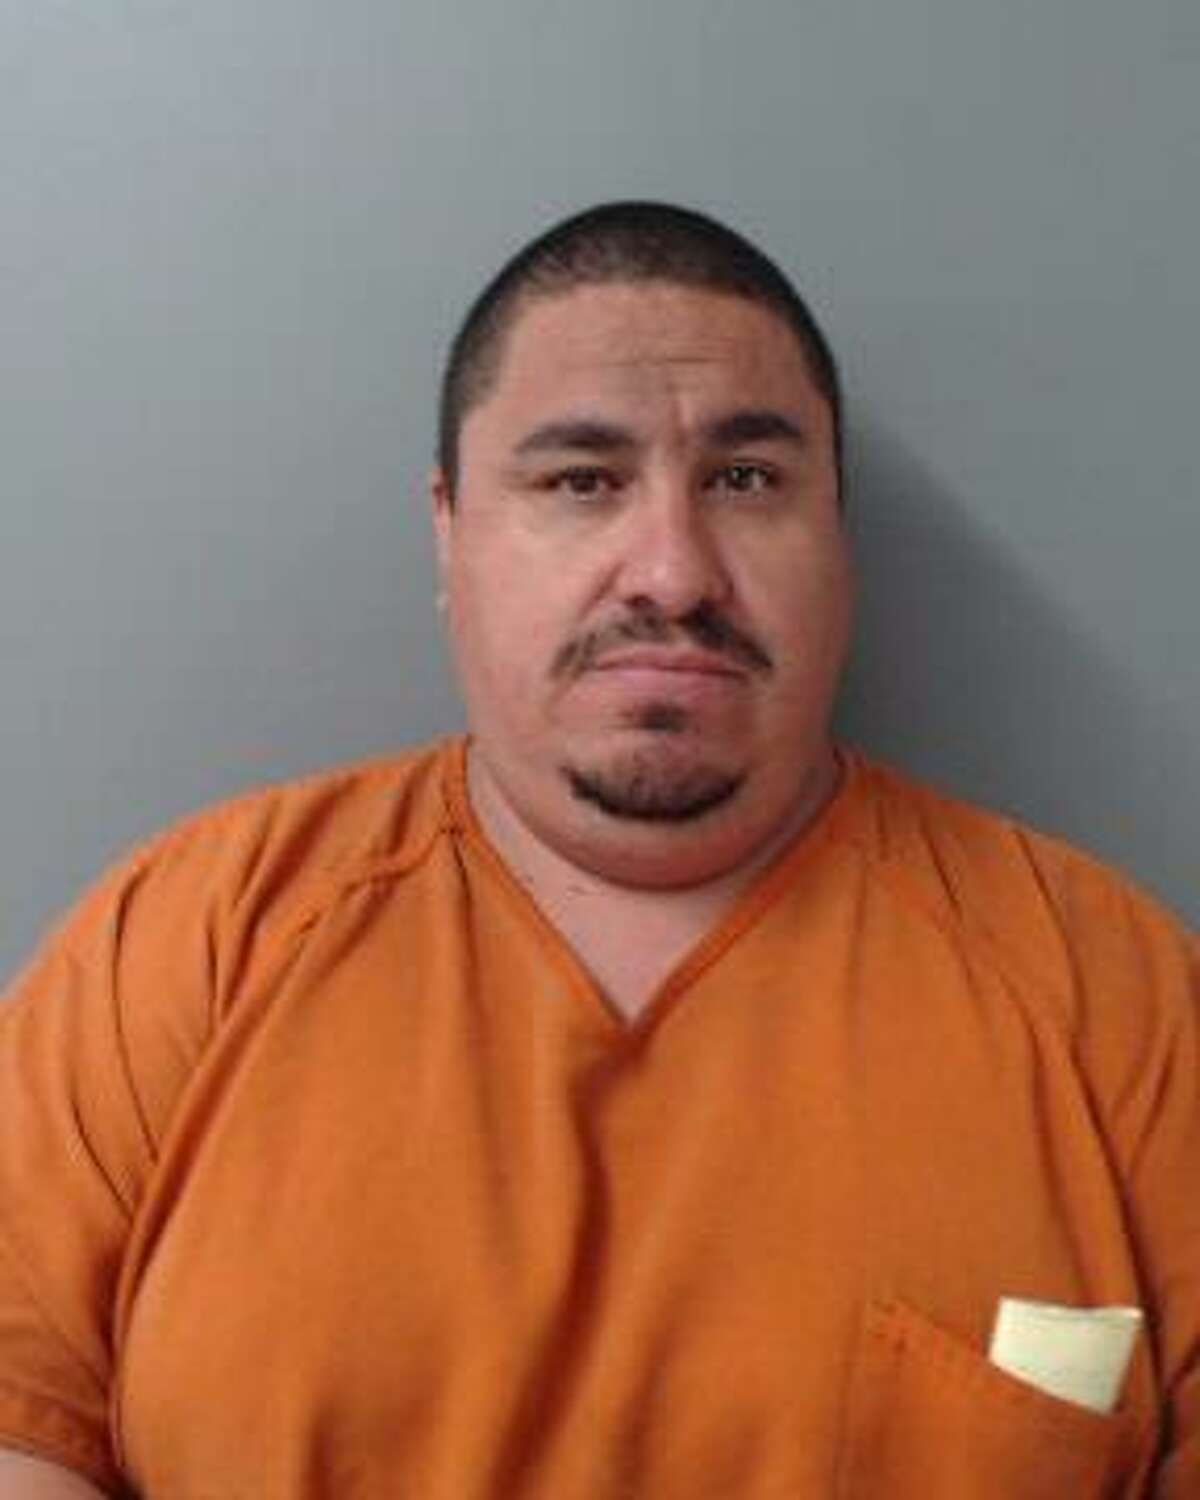 Oscar Gomez, 43, was arrested on July 18, 2022 for allegedly threatening to stab his wife in front of their son with a pair of scissors and trying to punch her after he discovered she obtained a food stamps card. He was charged with Aggravated Assault with a Deadly Weapon -- a second-degree felony. 